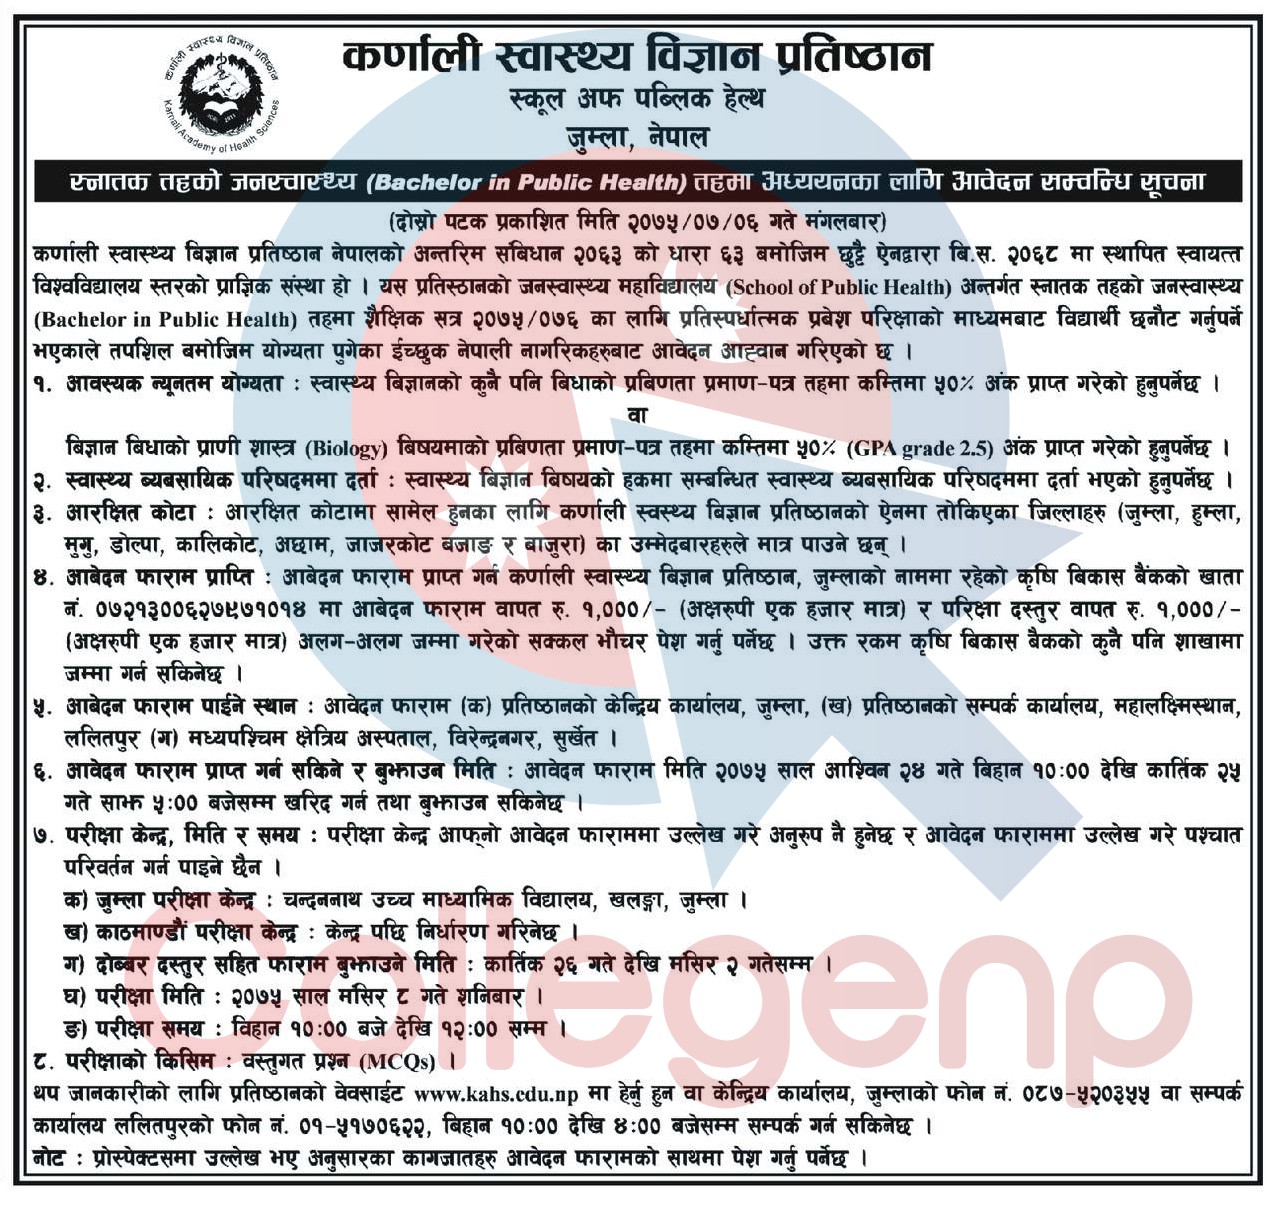 Admission Open for BPH at Karnali Academy of Health Sciences -KAHS